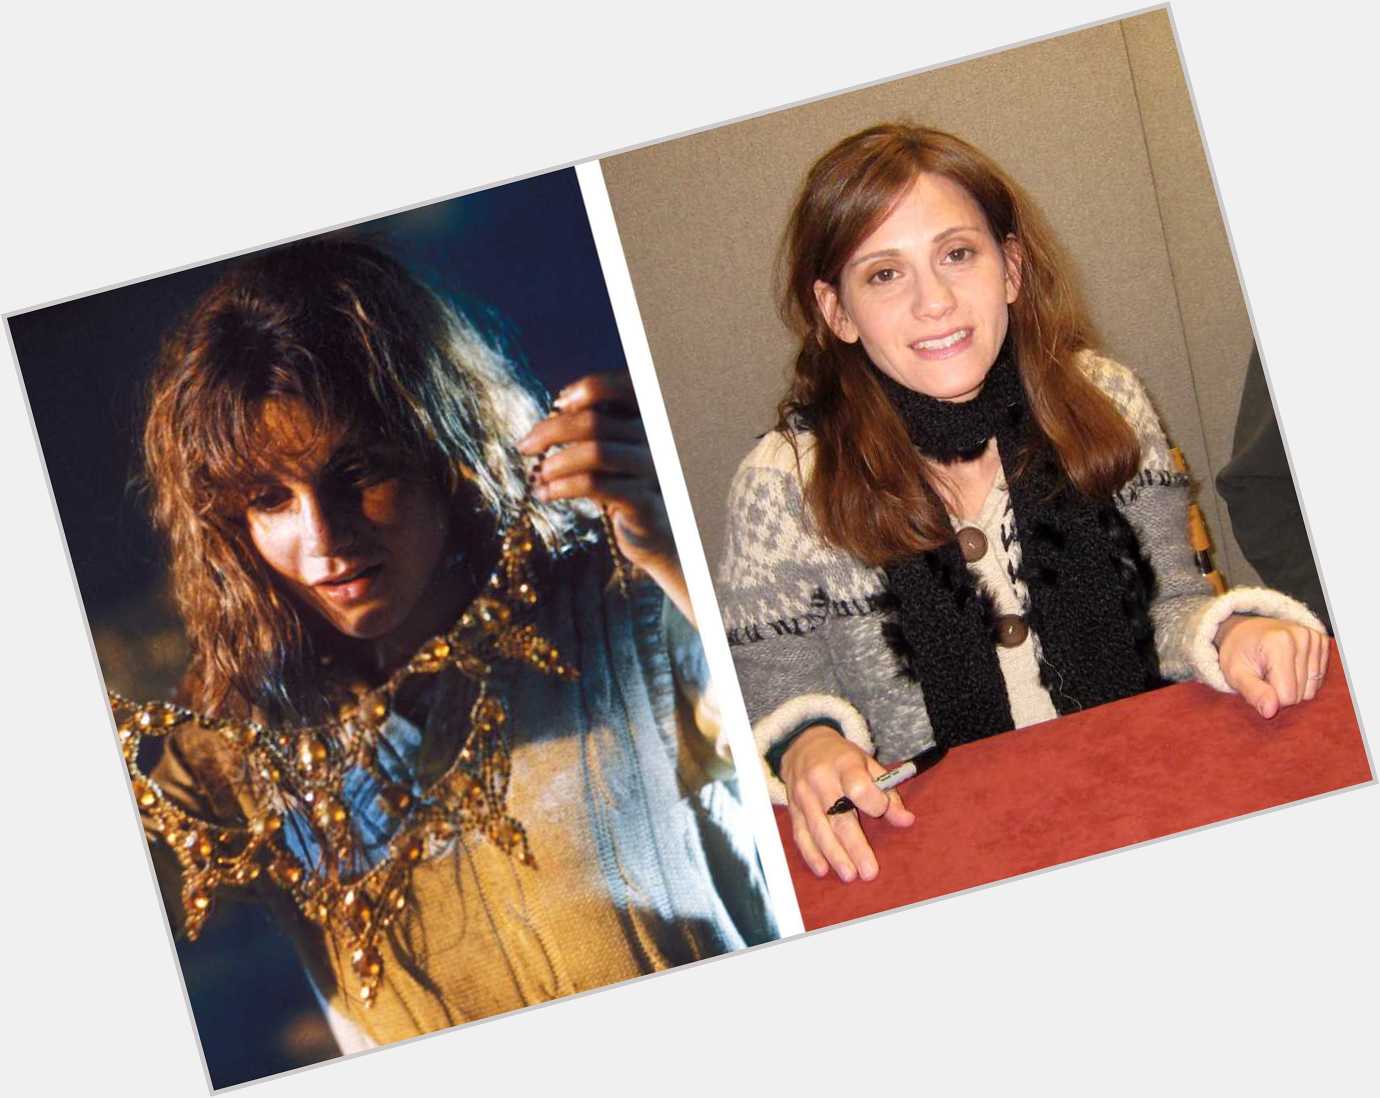 Happy \"Speed Limit\" birthday to THE GOONIES star Kerri Green, who turns 55 years old today! 